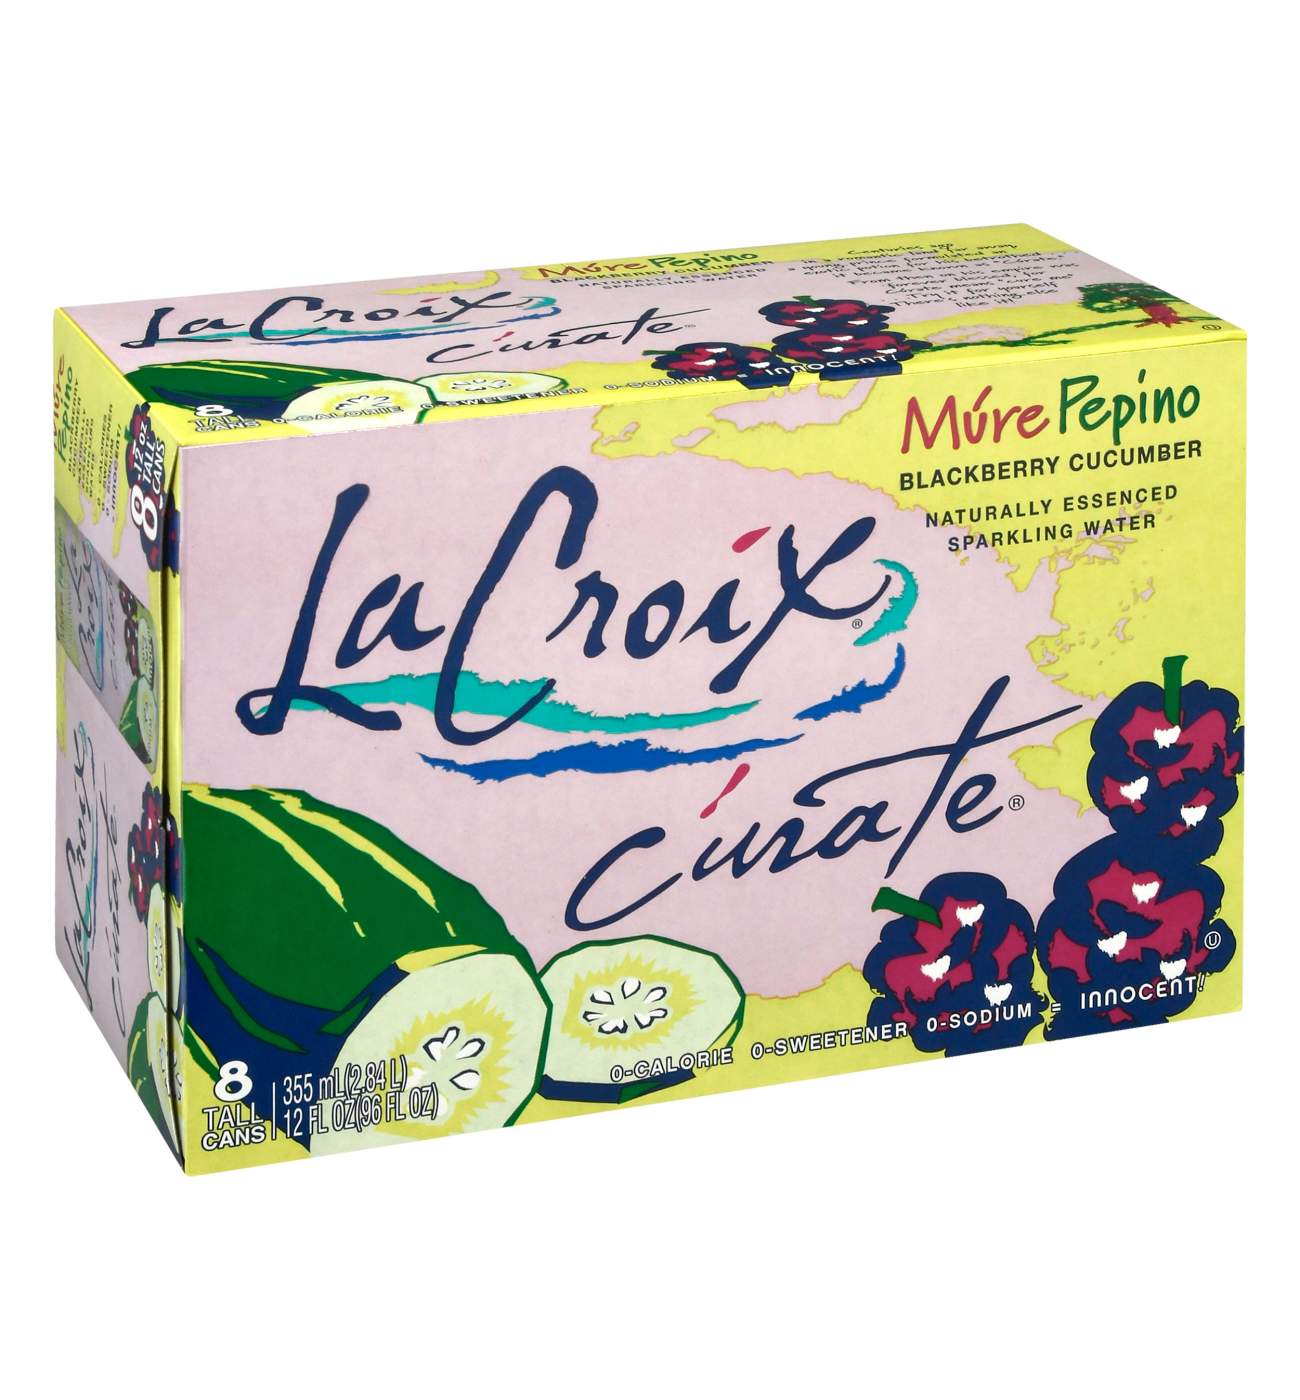 LaCroix Curate Mure Pepino Sparkling Water 12 oz Cans; image 1 of 2